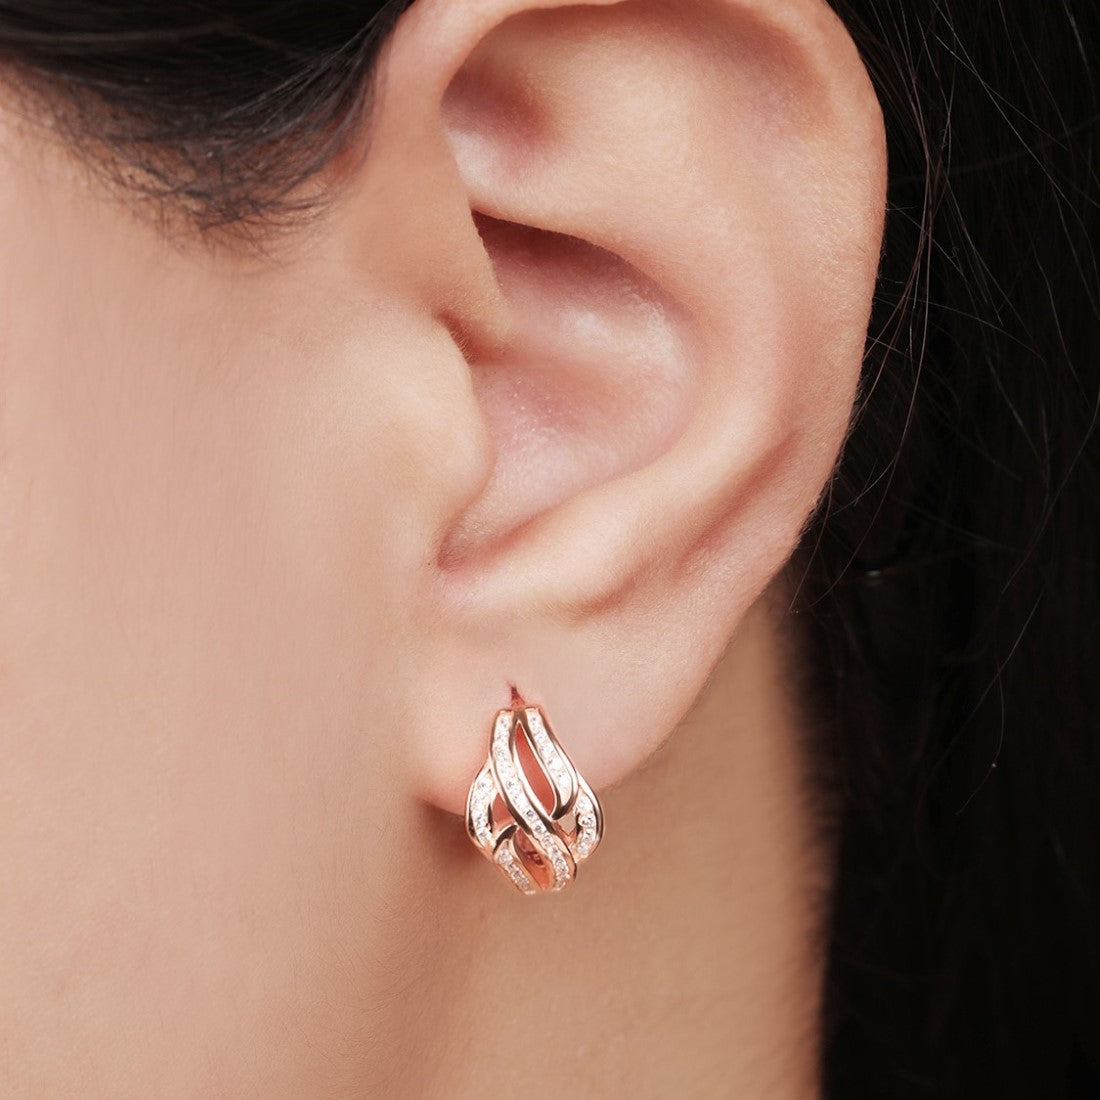 Gilded Petals Brilliance Rose Gold-Plated CZ 925 Sterling Silver Hoop Earring